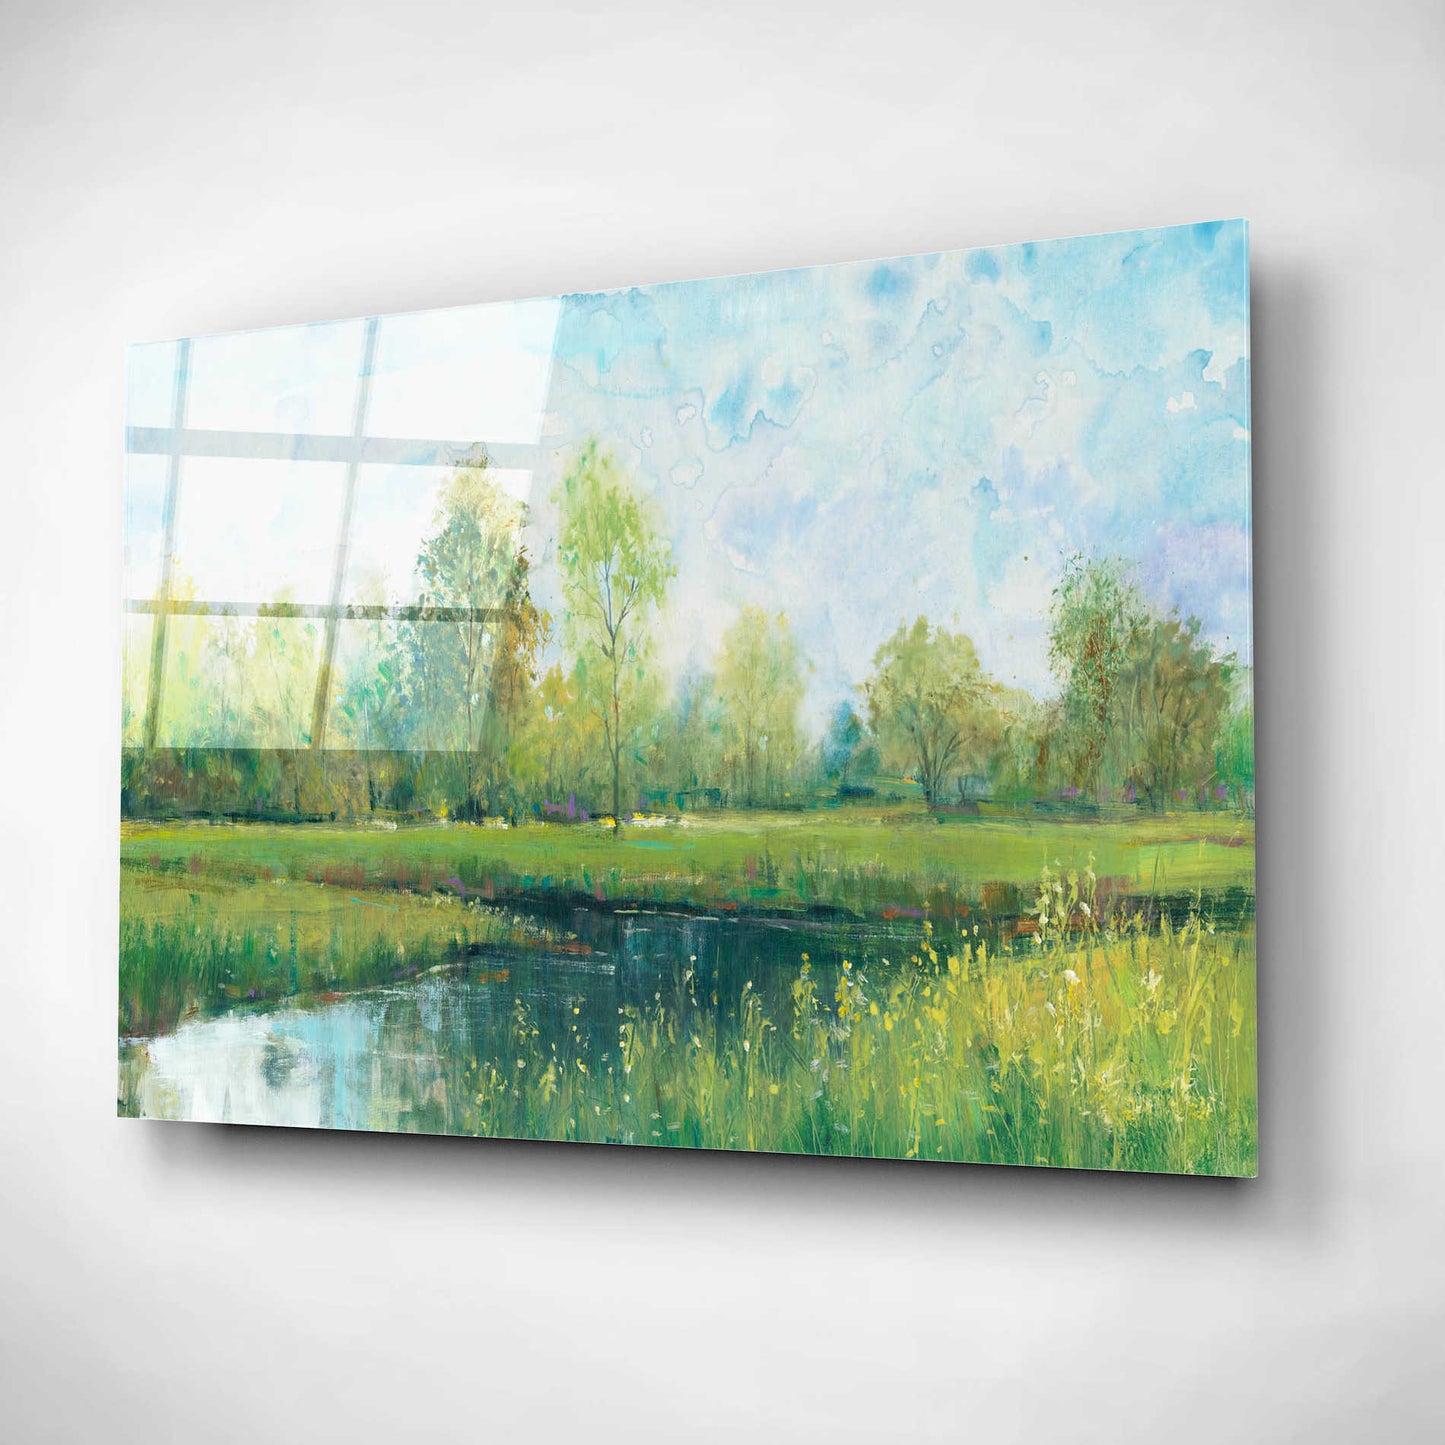 Epic Art 'Tranquil Park I' by Tim O'Toole, Acrylic Glass Wall Art,16x12